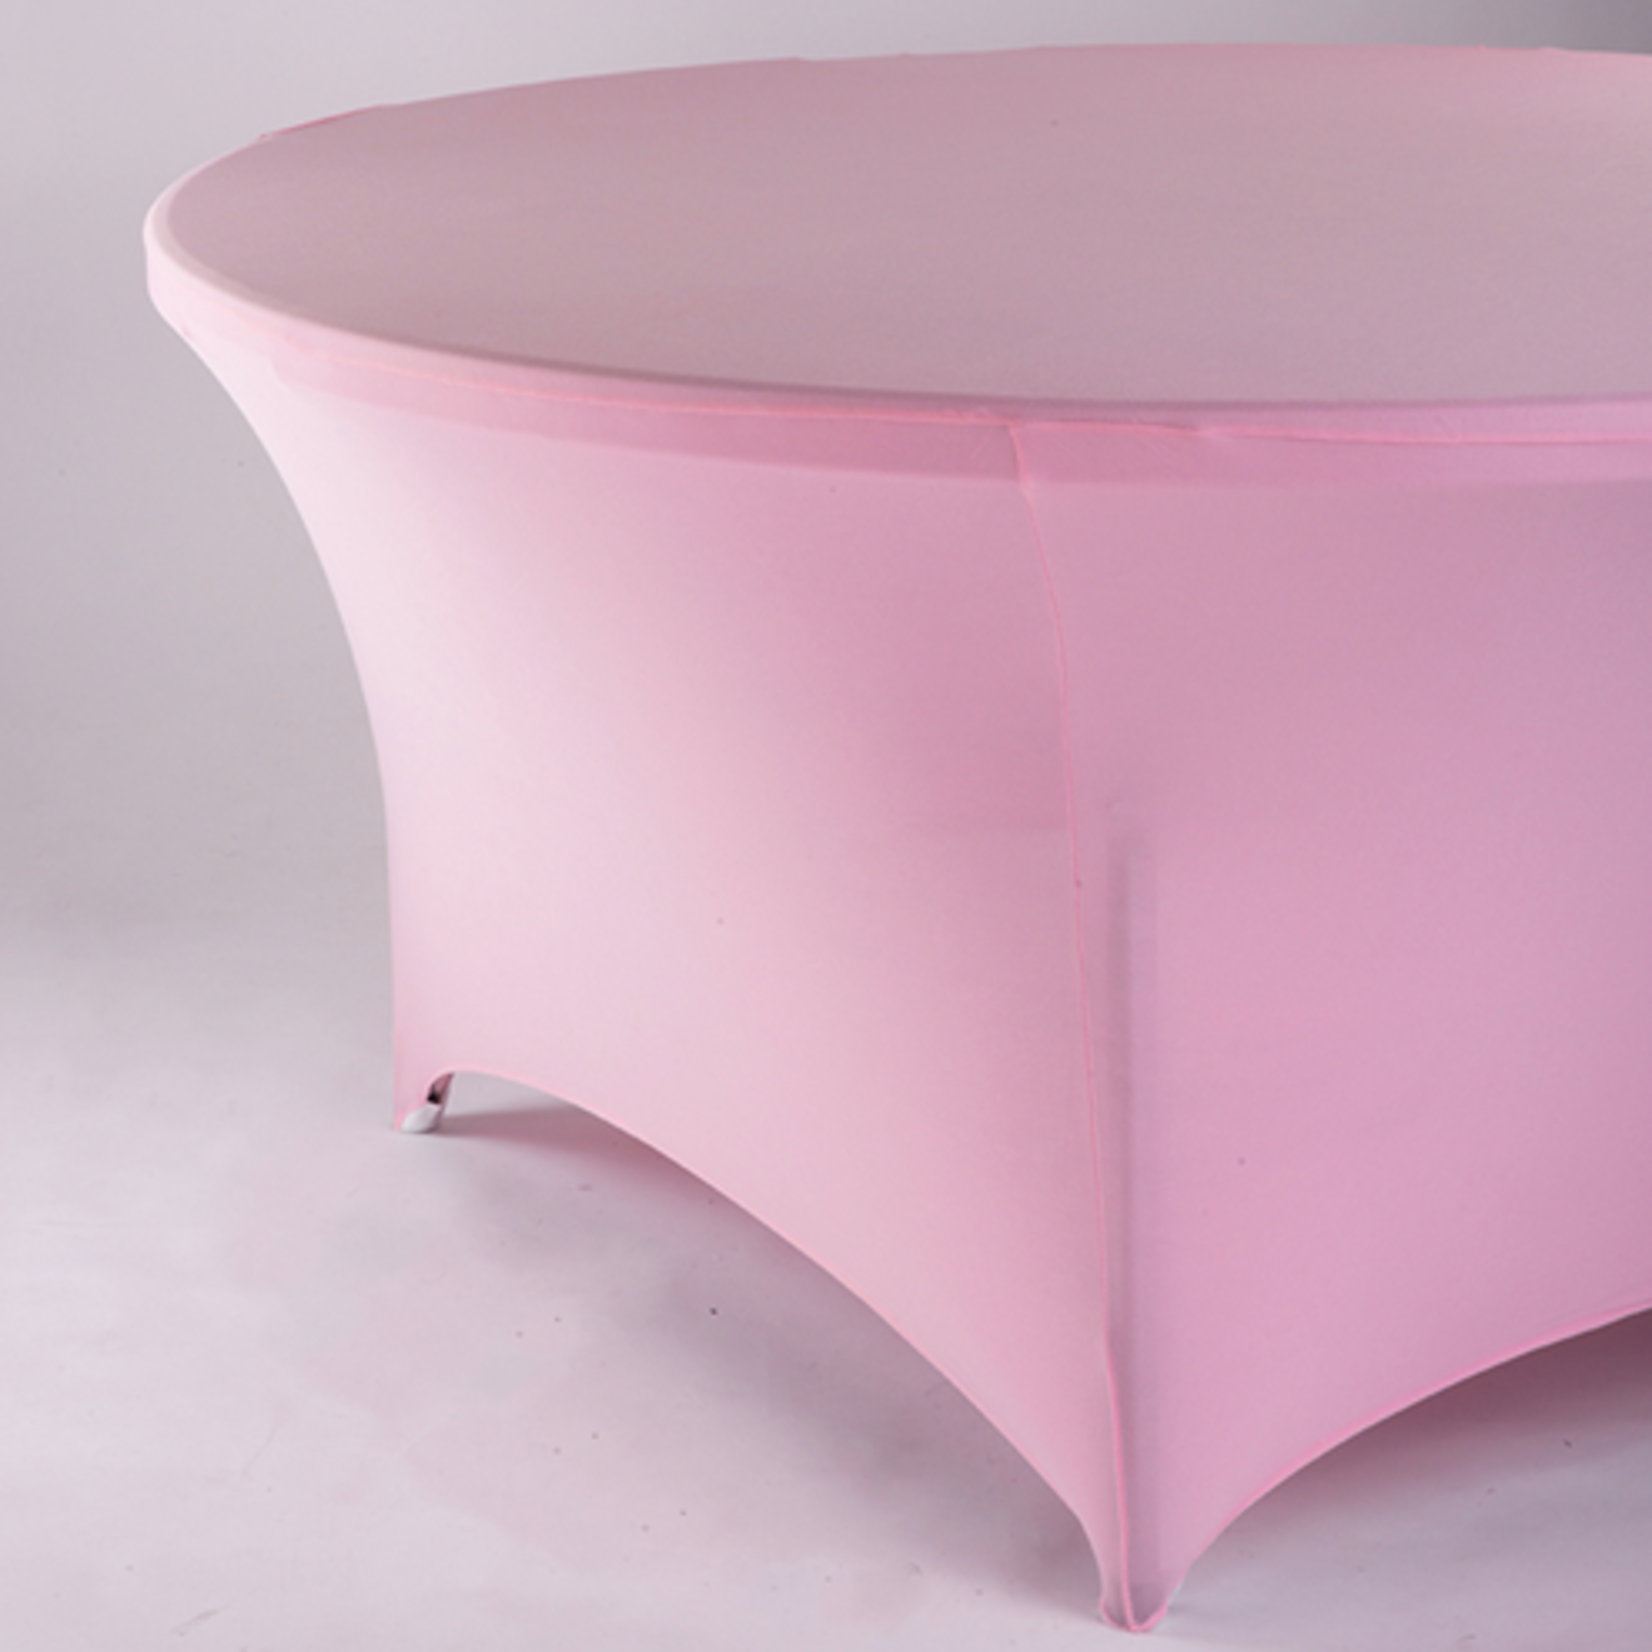 SPANDEX 60" ROUND TABLE COVER